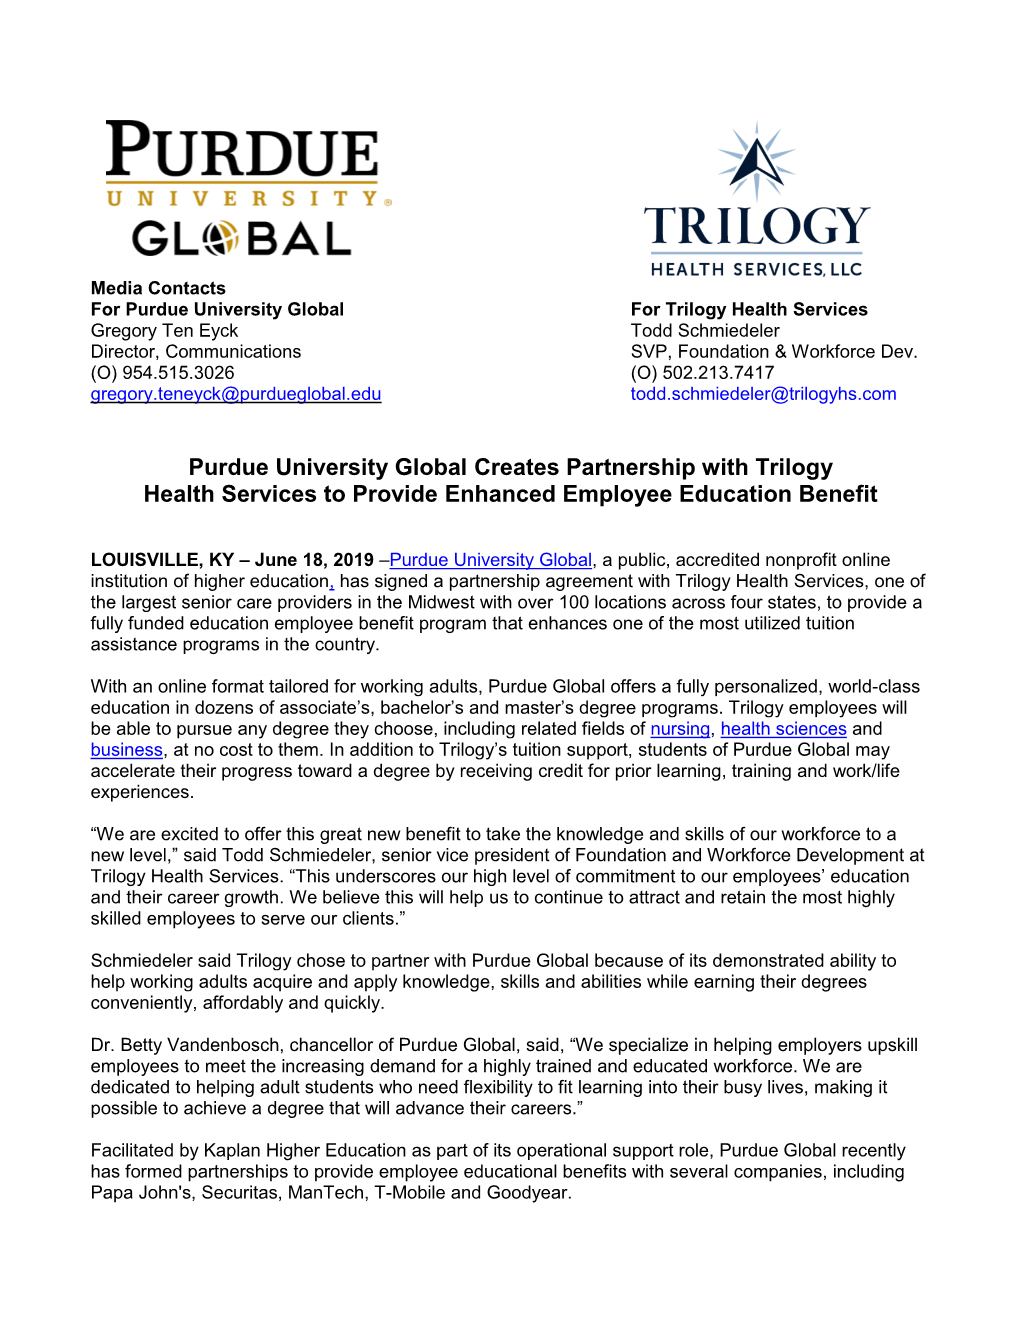 Purdue University Global Creates Partnership with Trilogy Health Services to Provide Enhanced Employee Education Benefit